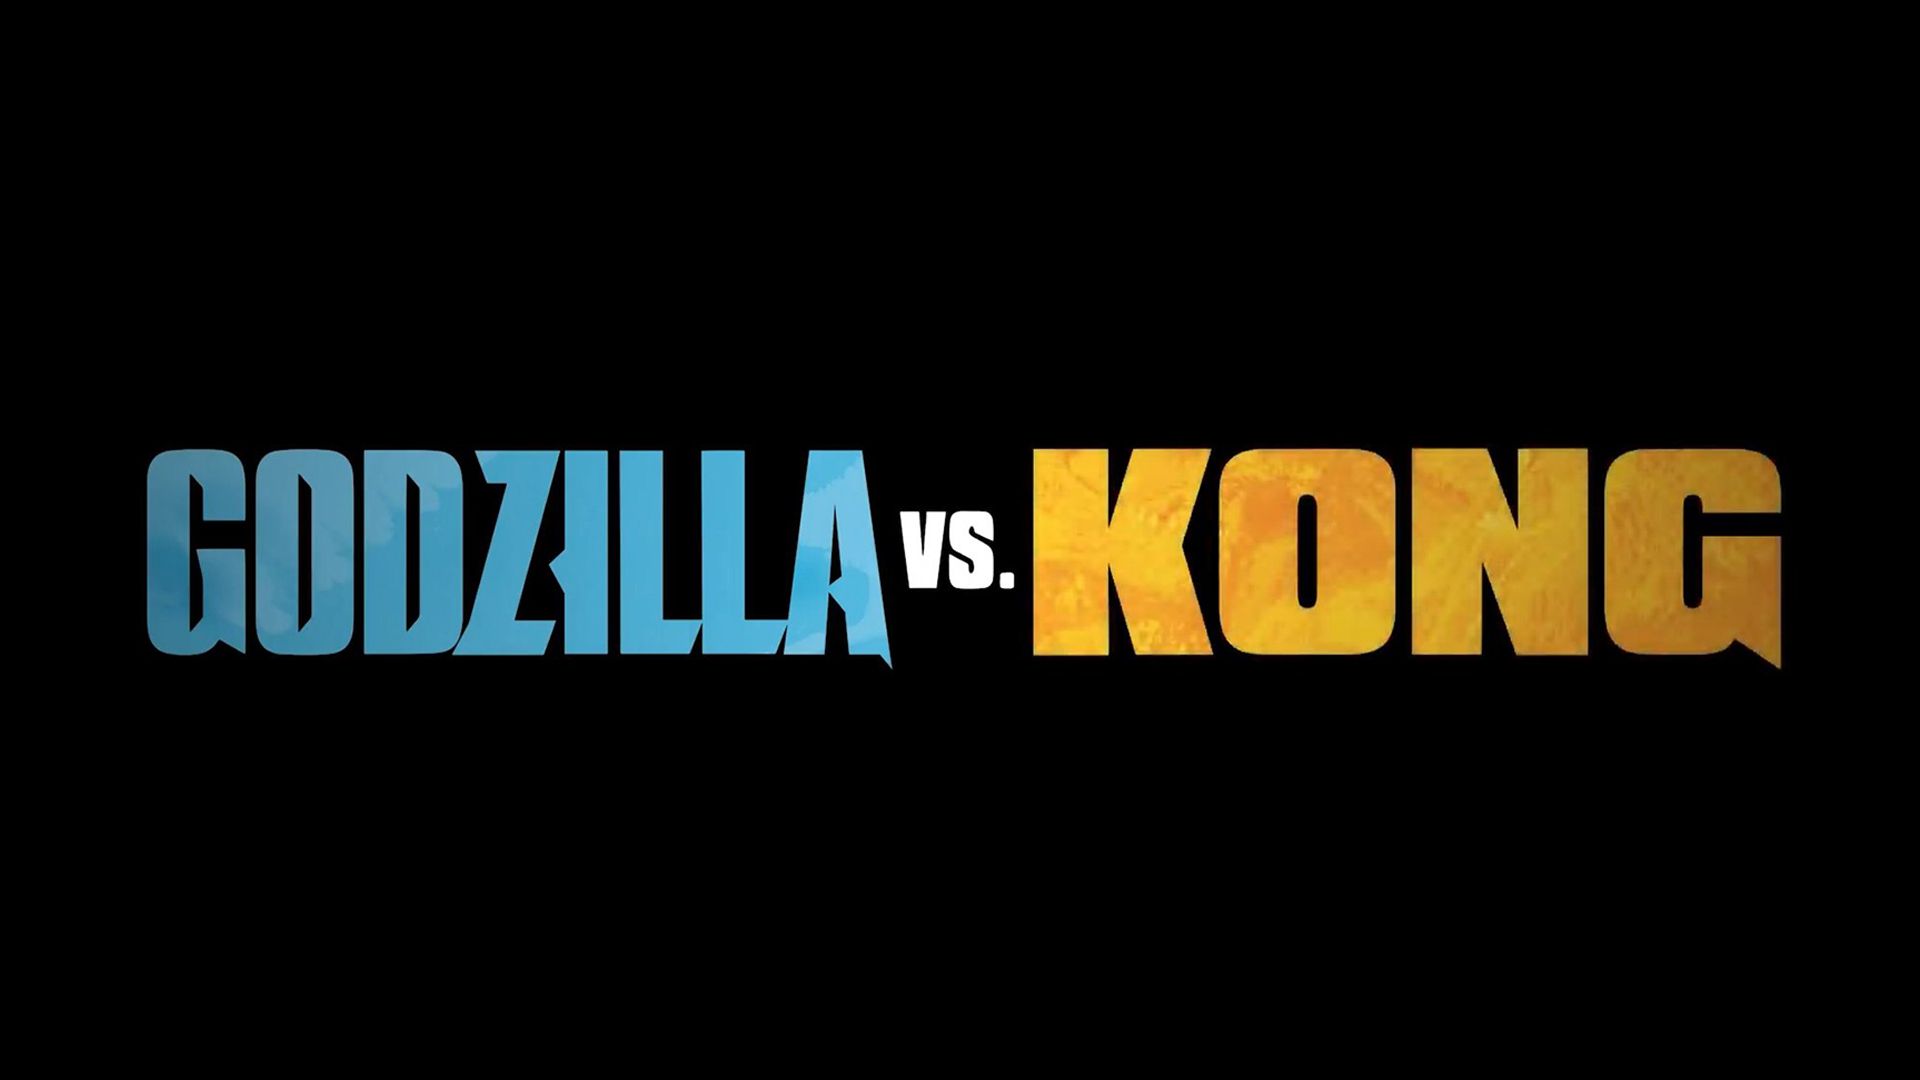 Godzilla vs Kong logo is here (and it's a monstrous disappointment)